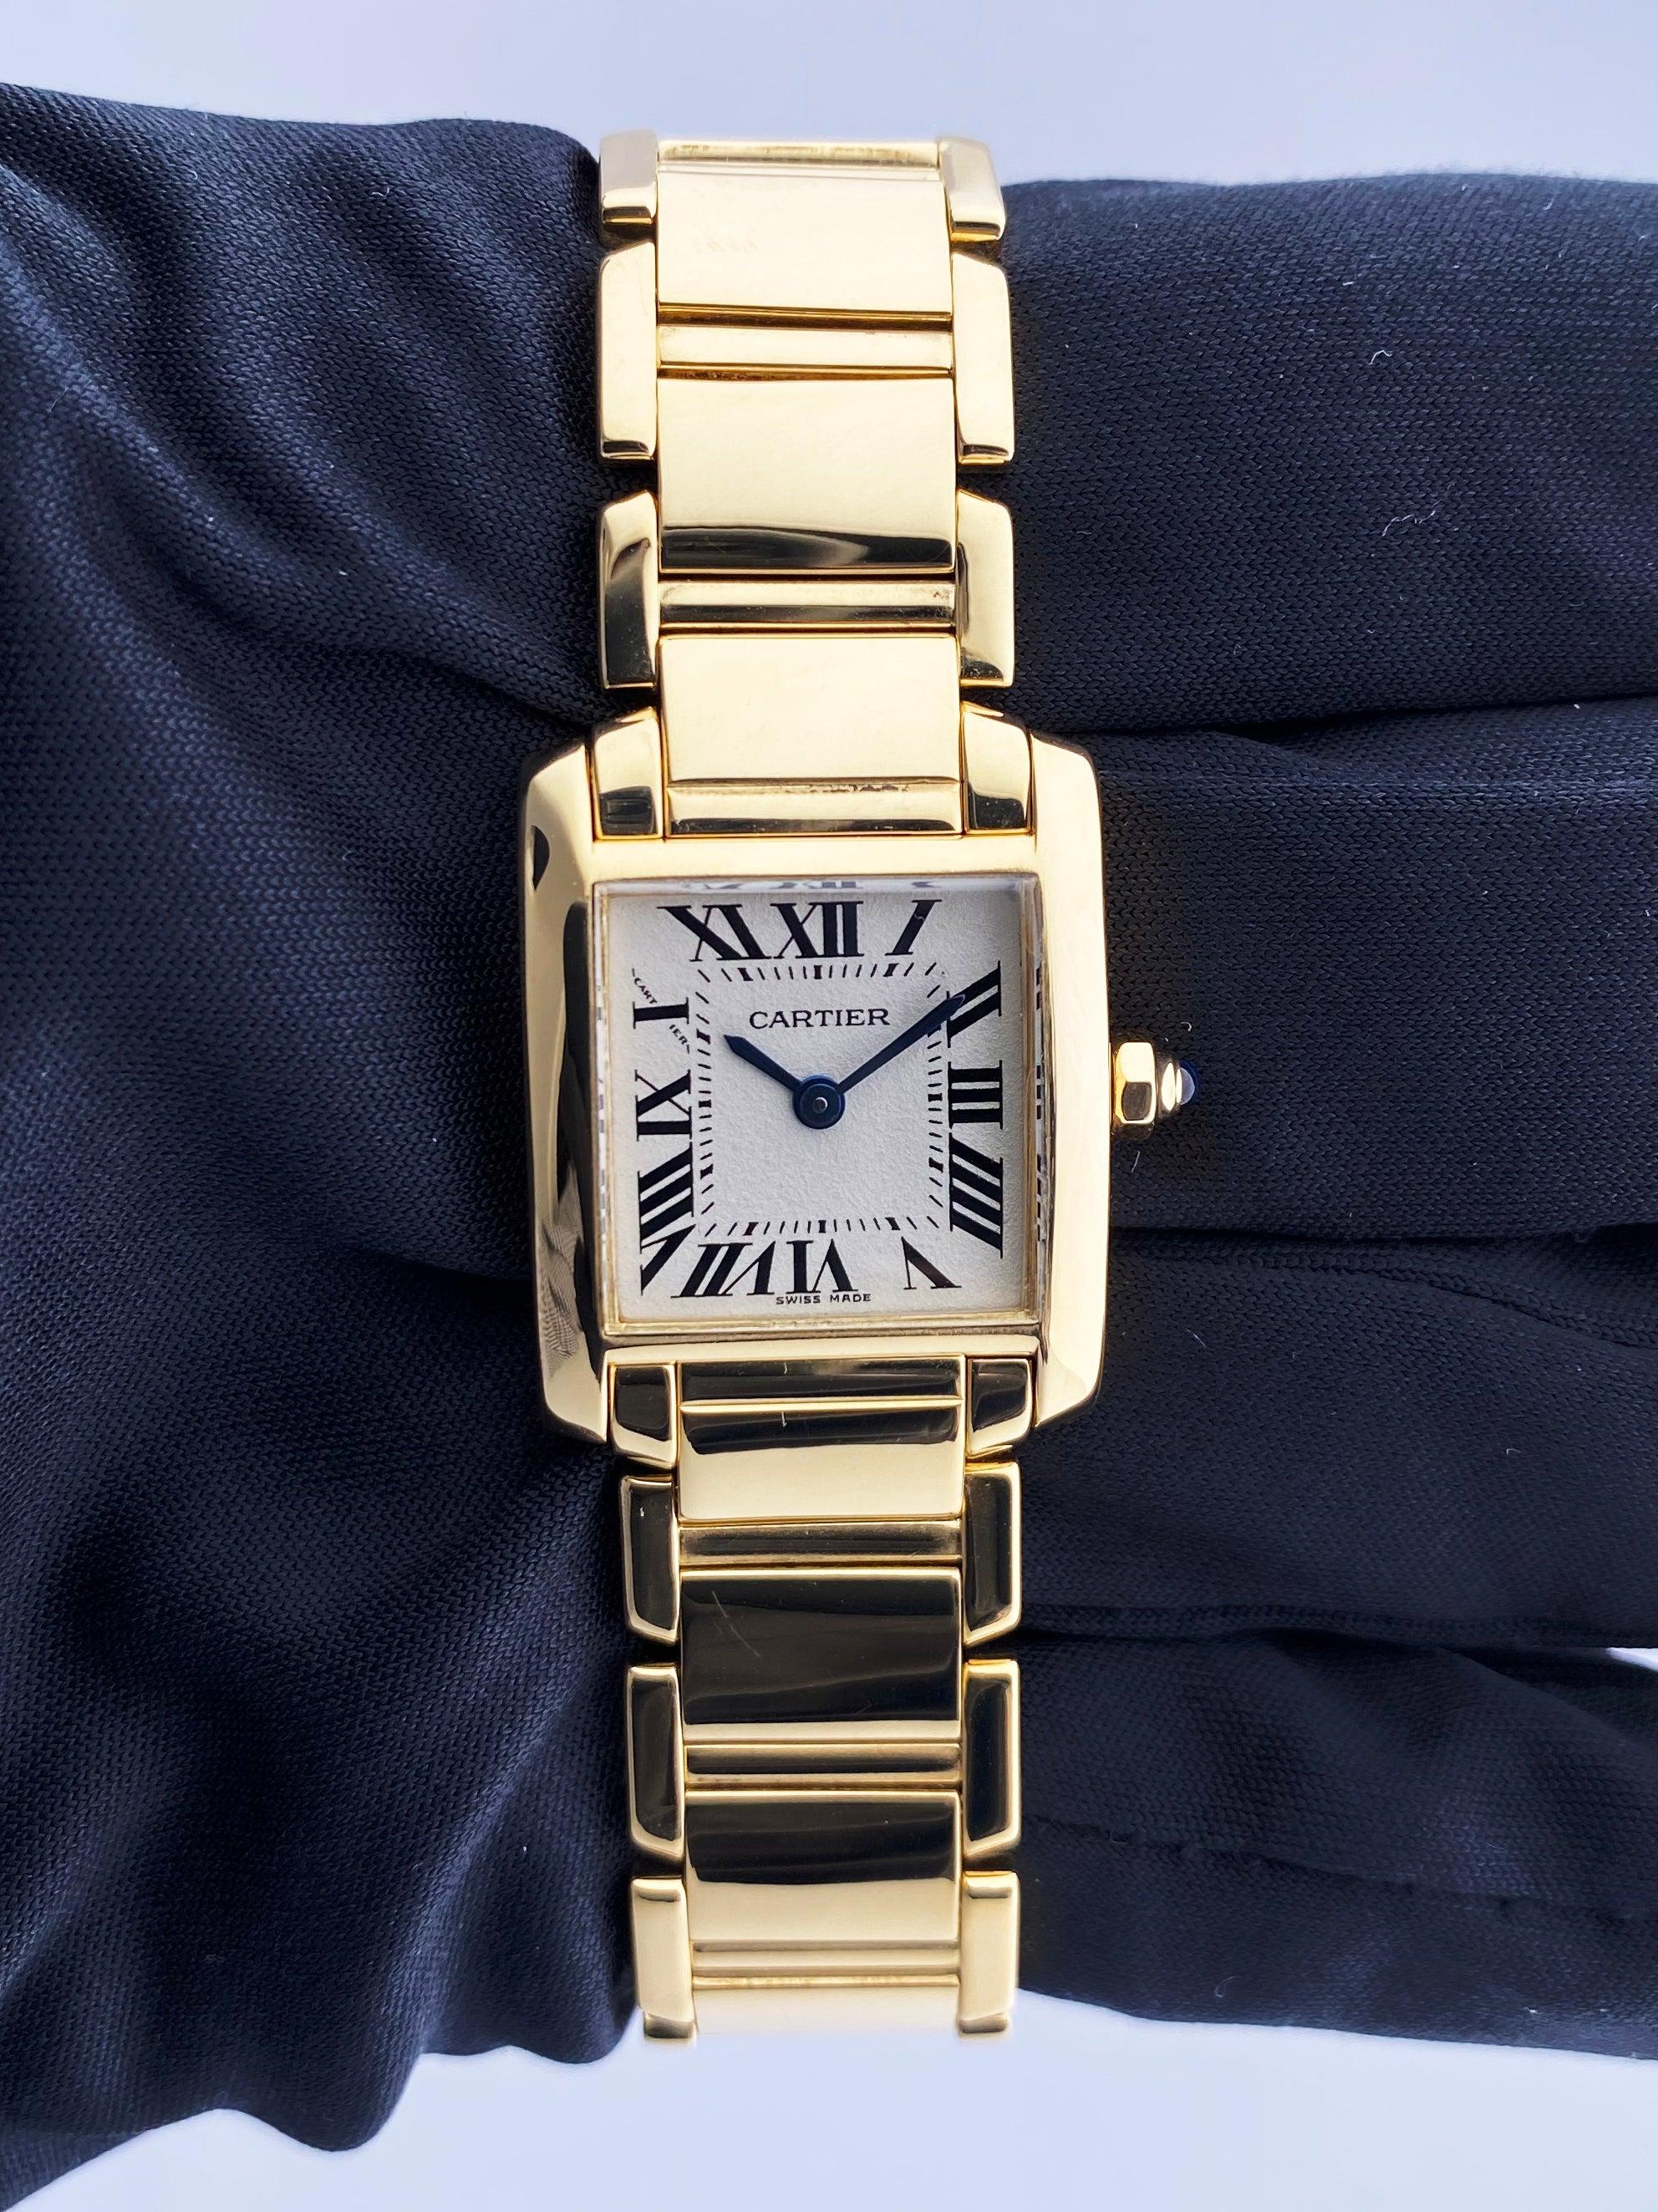 Cartier Tank Francaise 2385 ladies watch. 20mm 18k yellow gold case with 18K yellow gold bezel. Off-White dial with Blue steel hands and Roman numeral hour markers. Minute markers on the inner dial. 18K yellow gold bracelet with Hidden Butterfly.